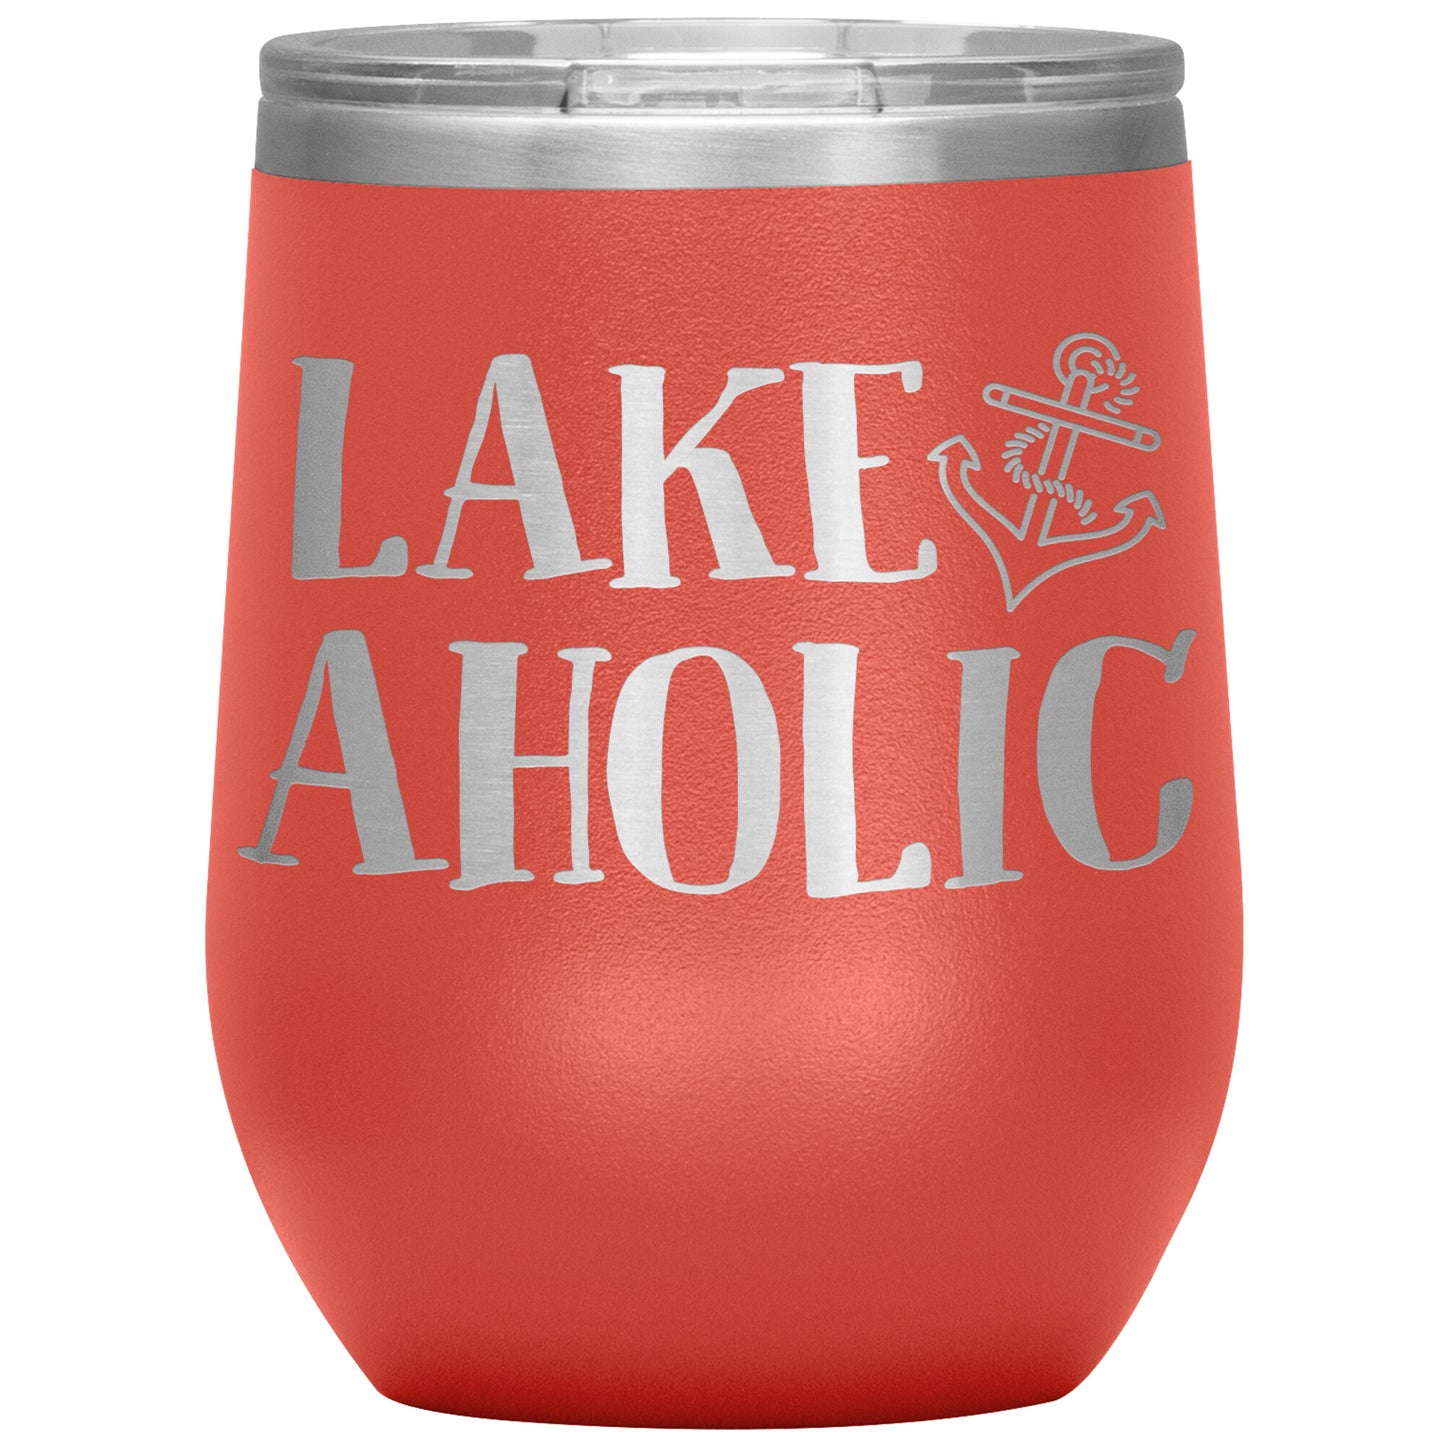 Lakeaholic Anchor 12oz Wine Tumbler - Funny Stemless Cup